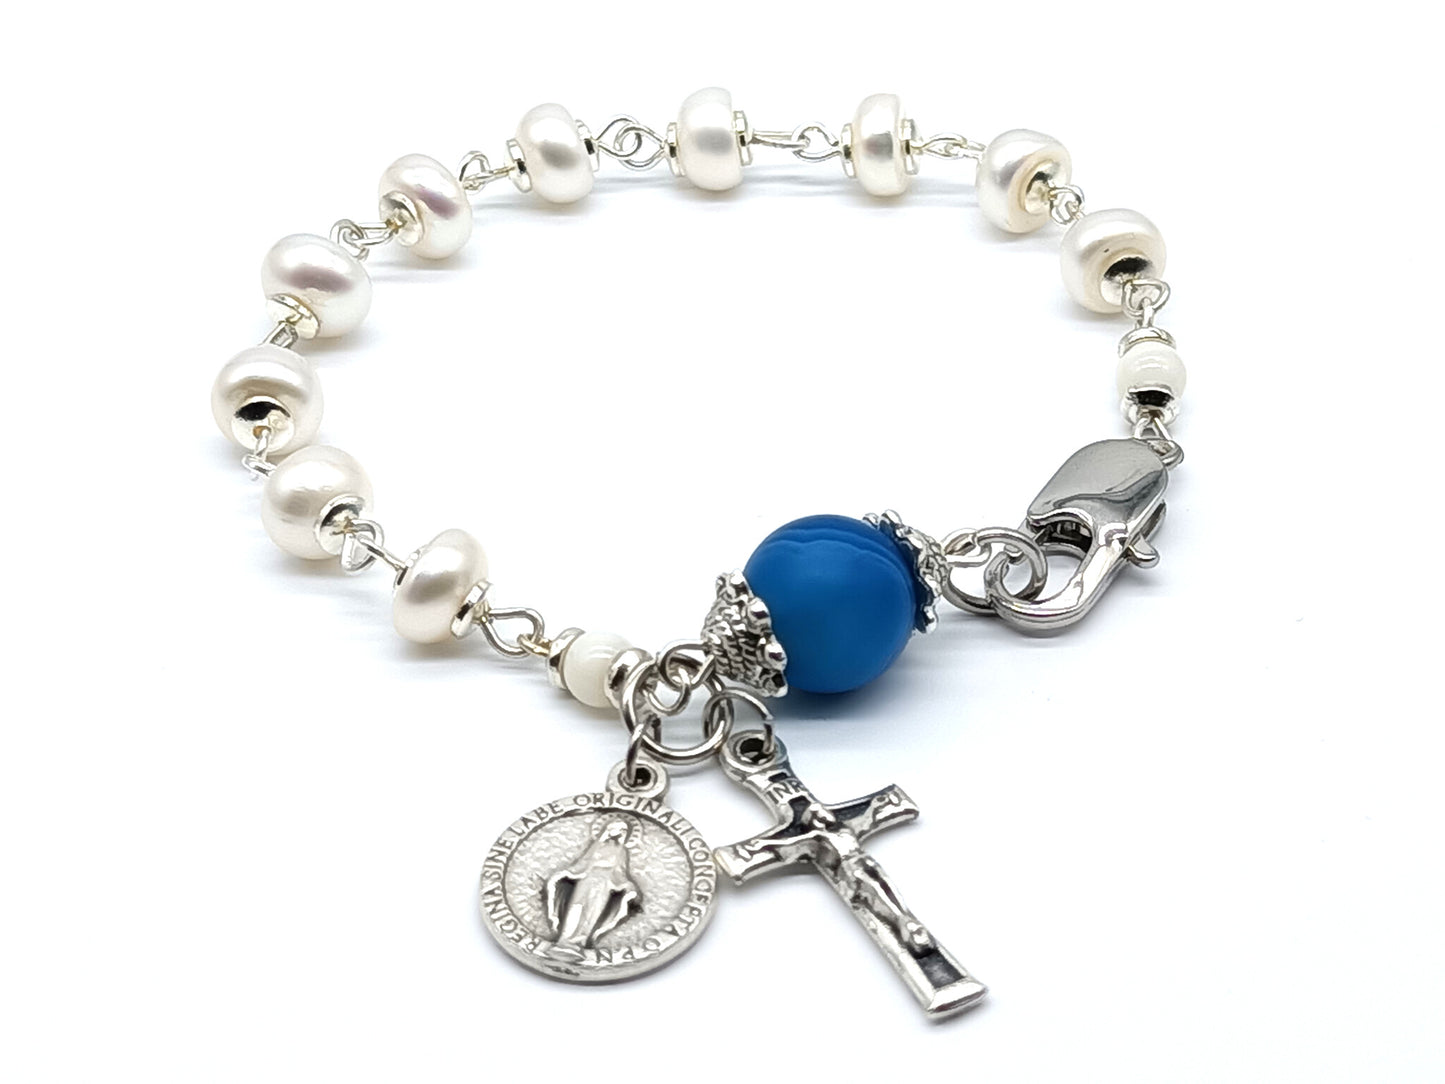 Custom unique rosary beads Genuine Pearl decade bracelet with small crucifix, miraculous medal and thistle medal.